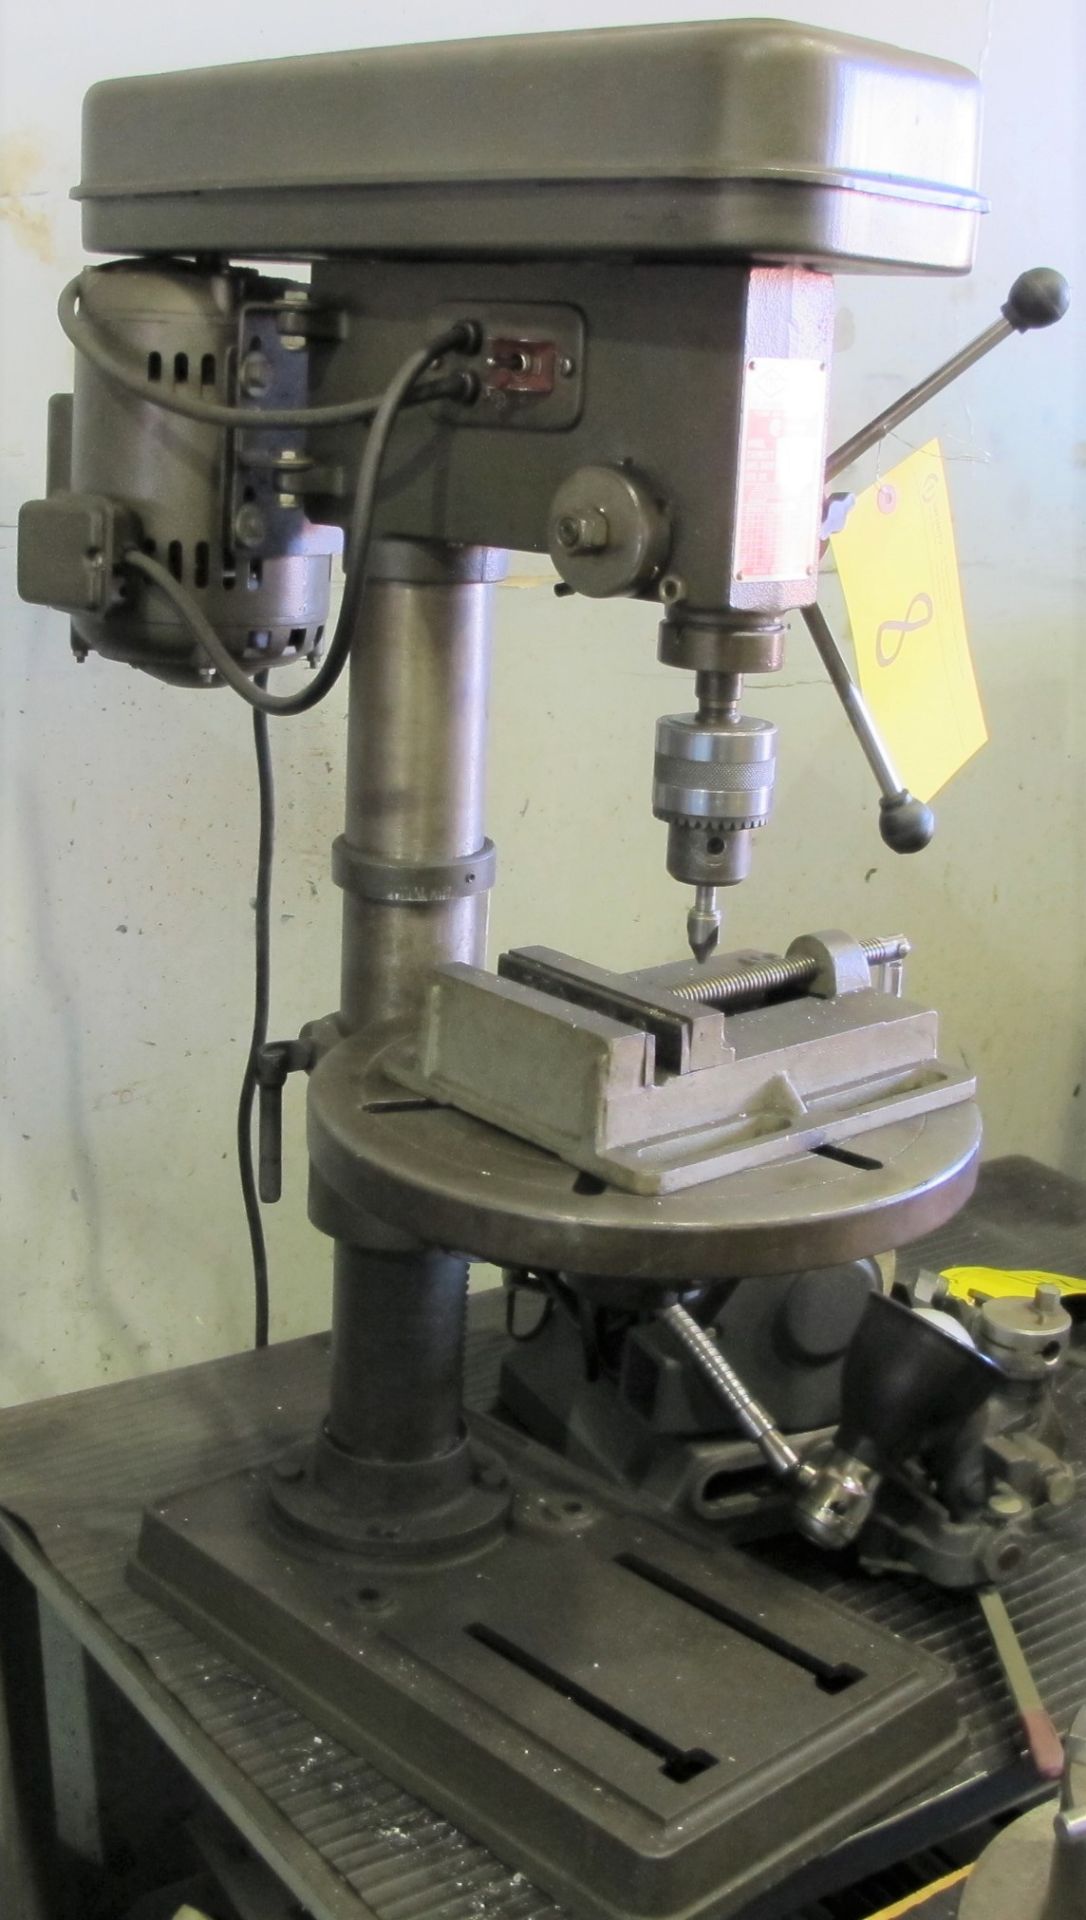 BENCHTOP ITC 16-SPEED DRILL PRESS, MODEL RVM-80AS-16, S/N 56027 W/ 12" TABLE AND VISE - Image 2 of 2